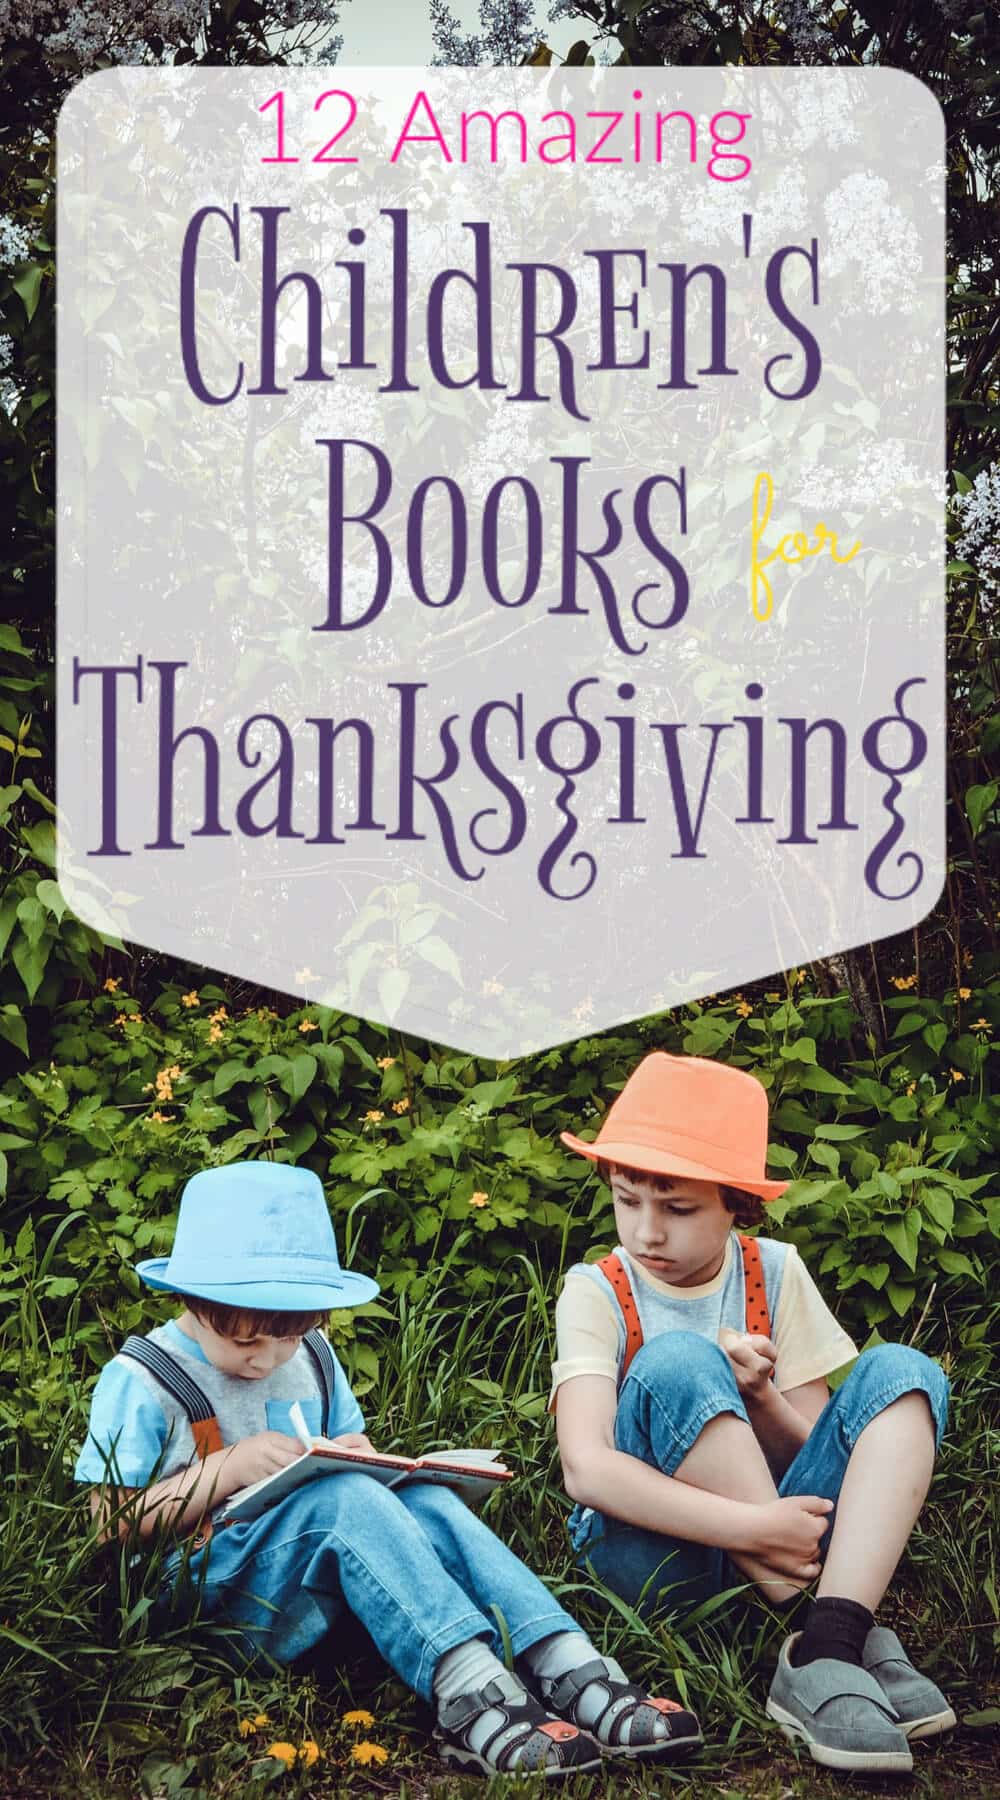 A favorite tradition in our family is to read holiday themed books to get into the spirit, but I've never thought to do it for Thanksgiving. This year, since my daughter has finally discovered she loves to read, we're going to give thanks on more than just one day.